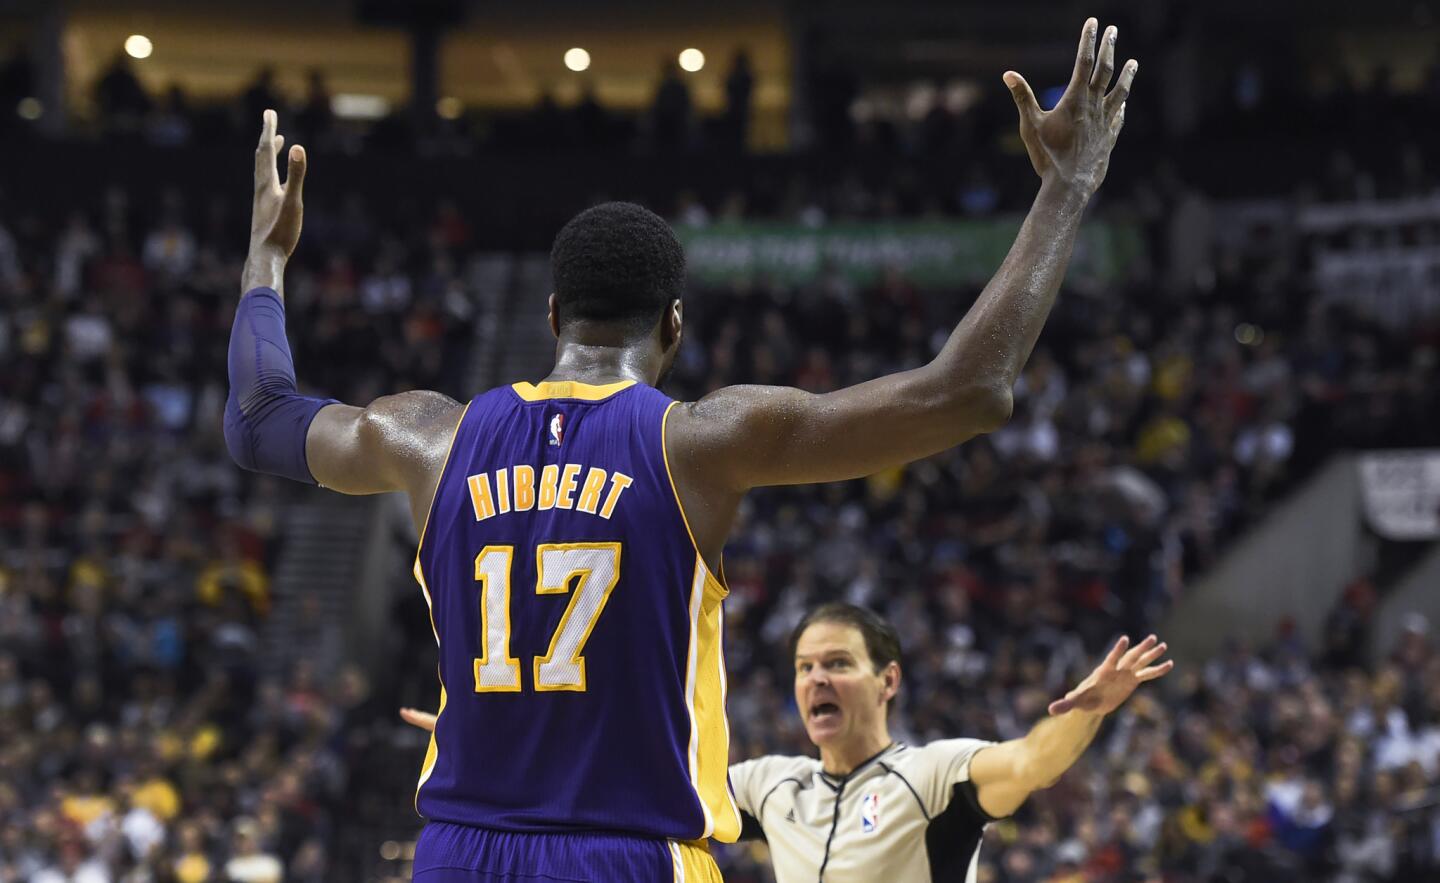 Lakers center Roy Hibbert argues a call with referee Kane Fitzgerald during the second half of a a game against the Portland Trail Blazers on Jan. 23.